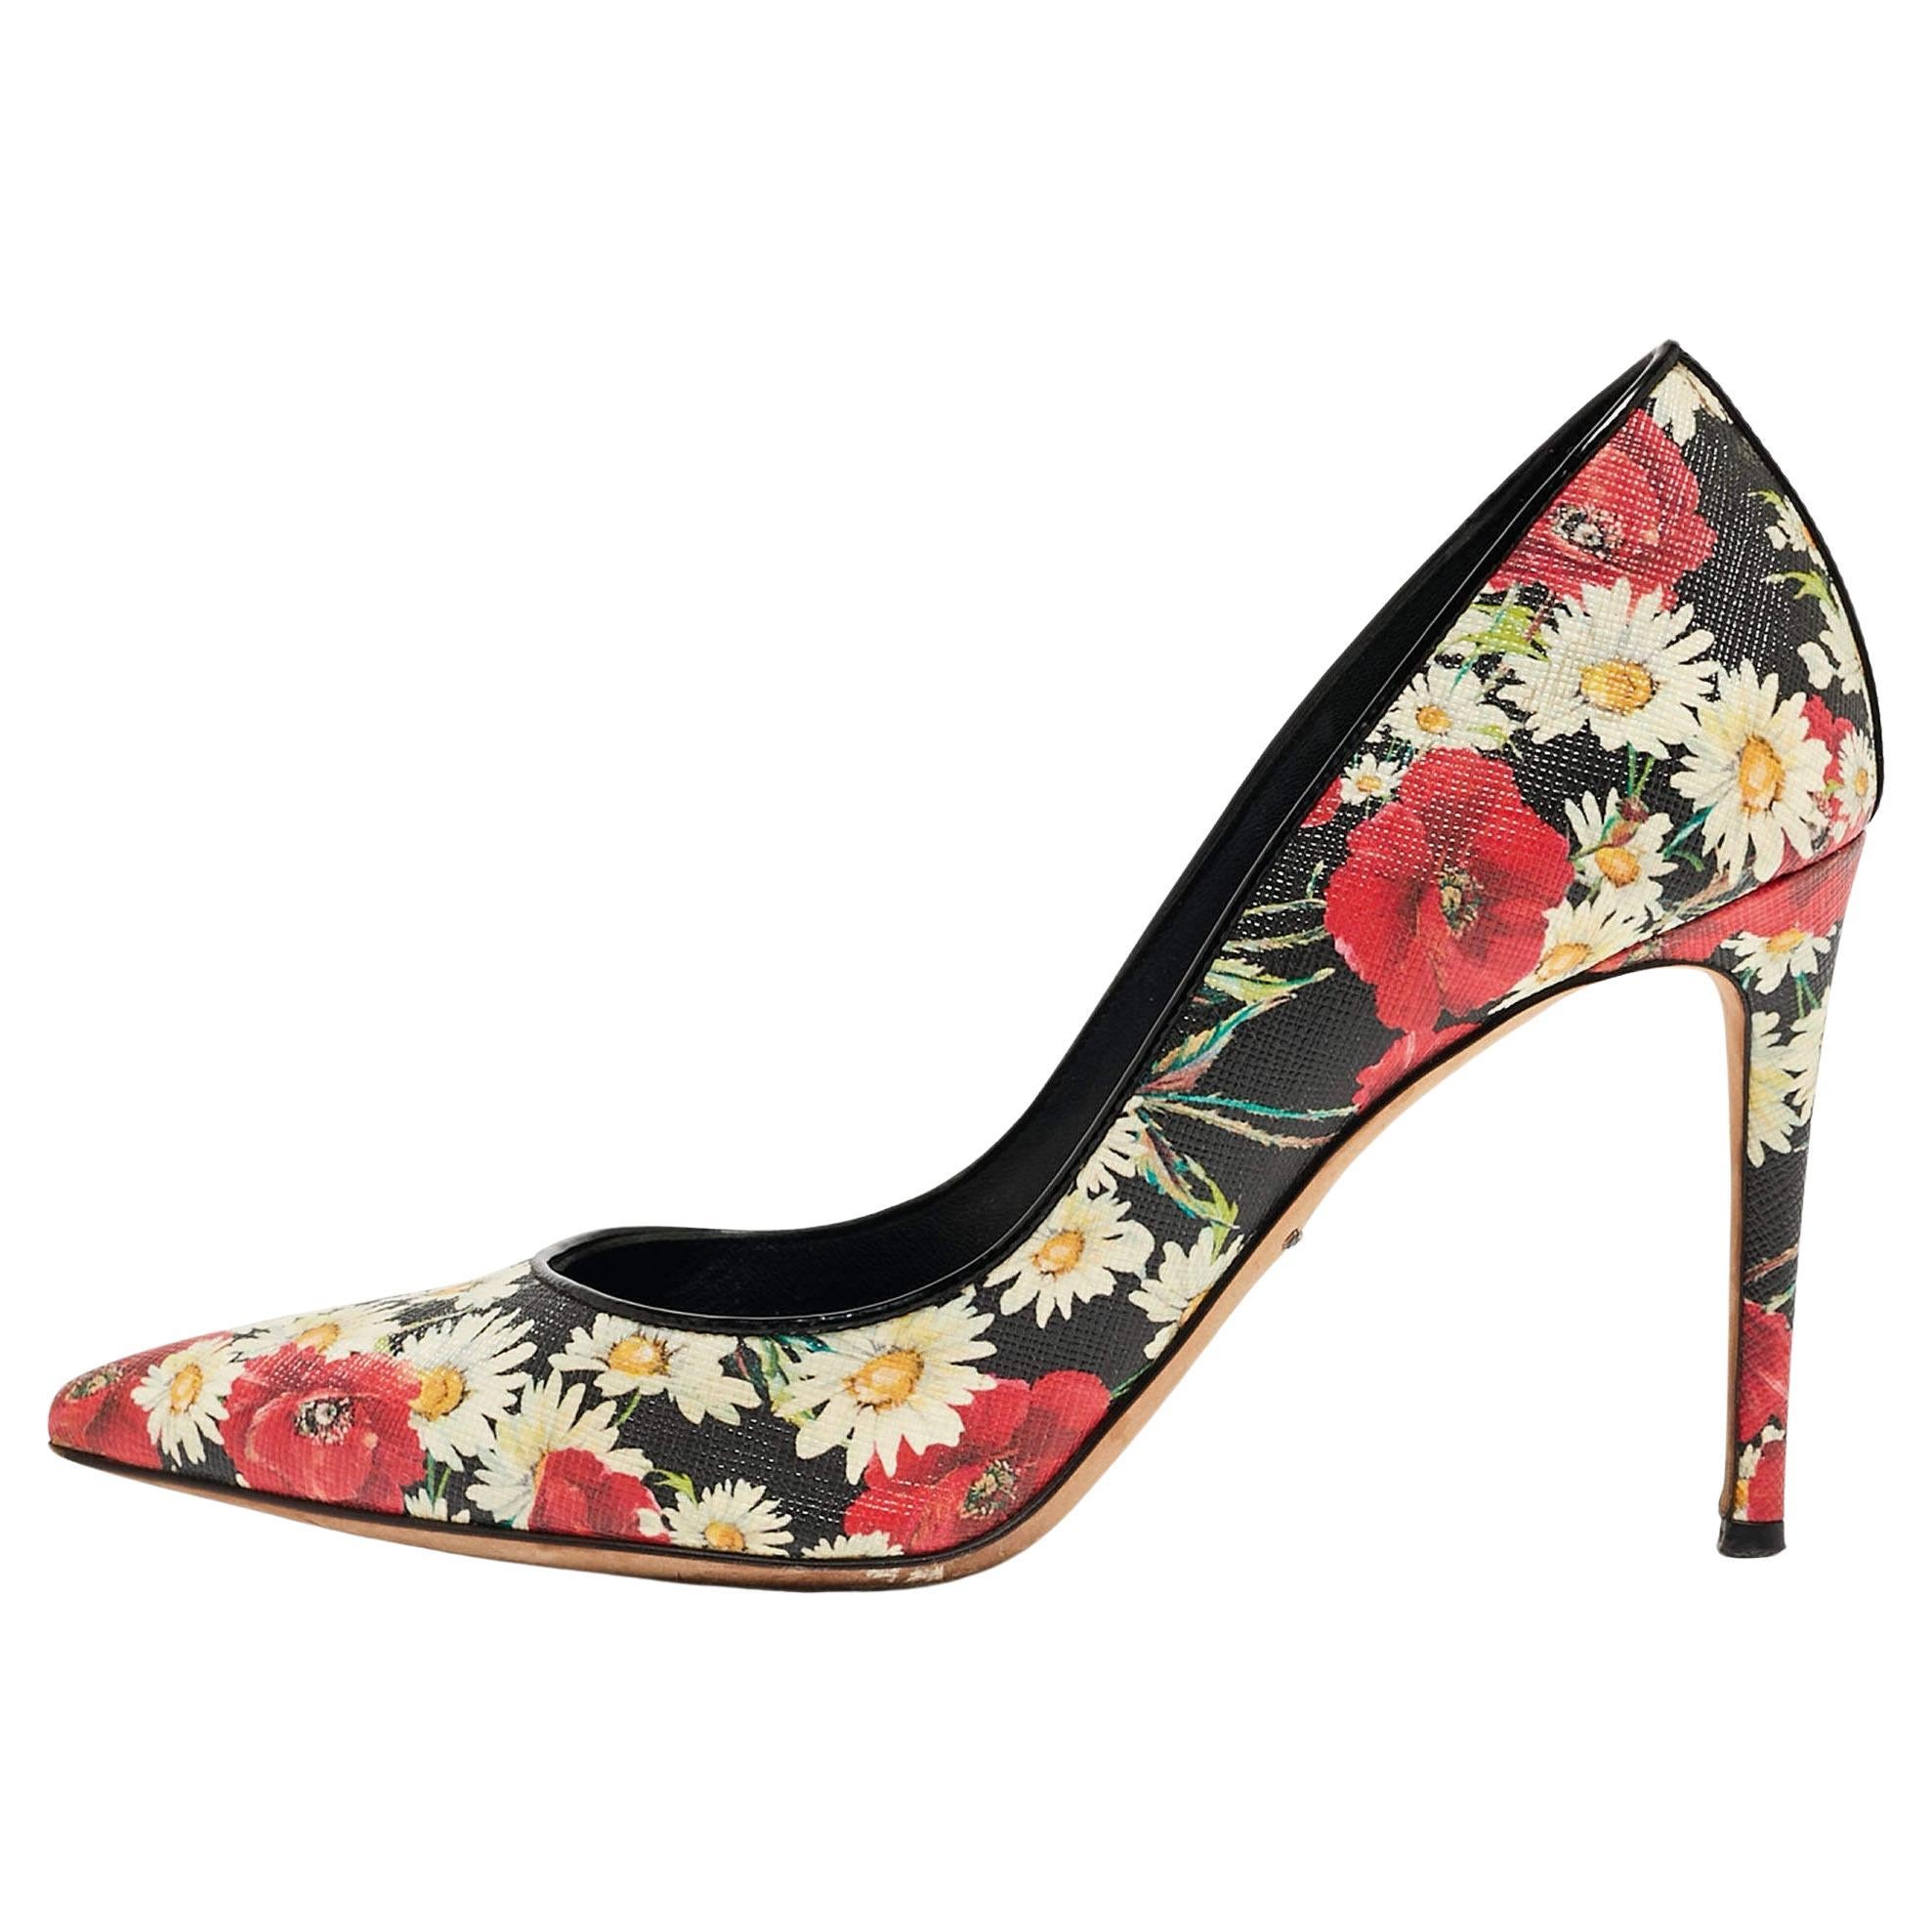 Dolce & Gabbana Tricolor Floral Print Textured Leather Pointed Toe Pumps Size 37